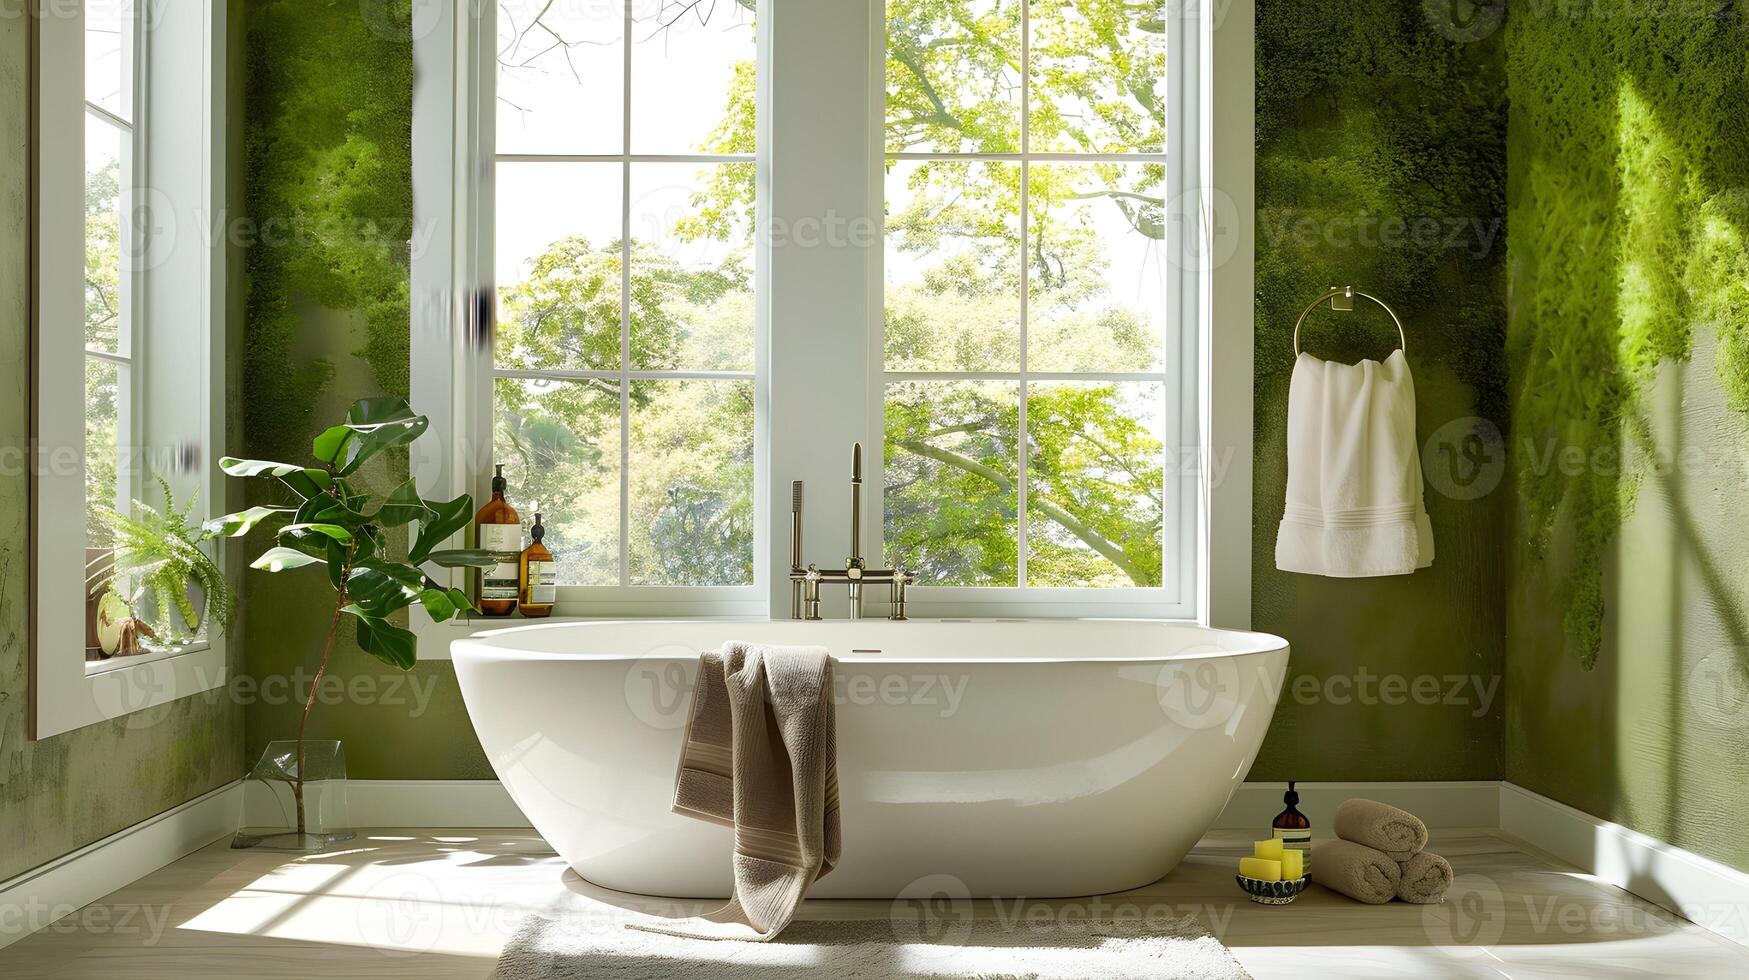 Serene Bathroom with Elegant Freestanding Tub and Lush Moss Wallpaper Embodying Tranquility and Nature-Inspired Design photo